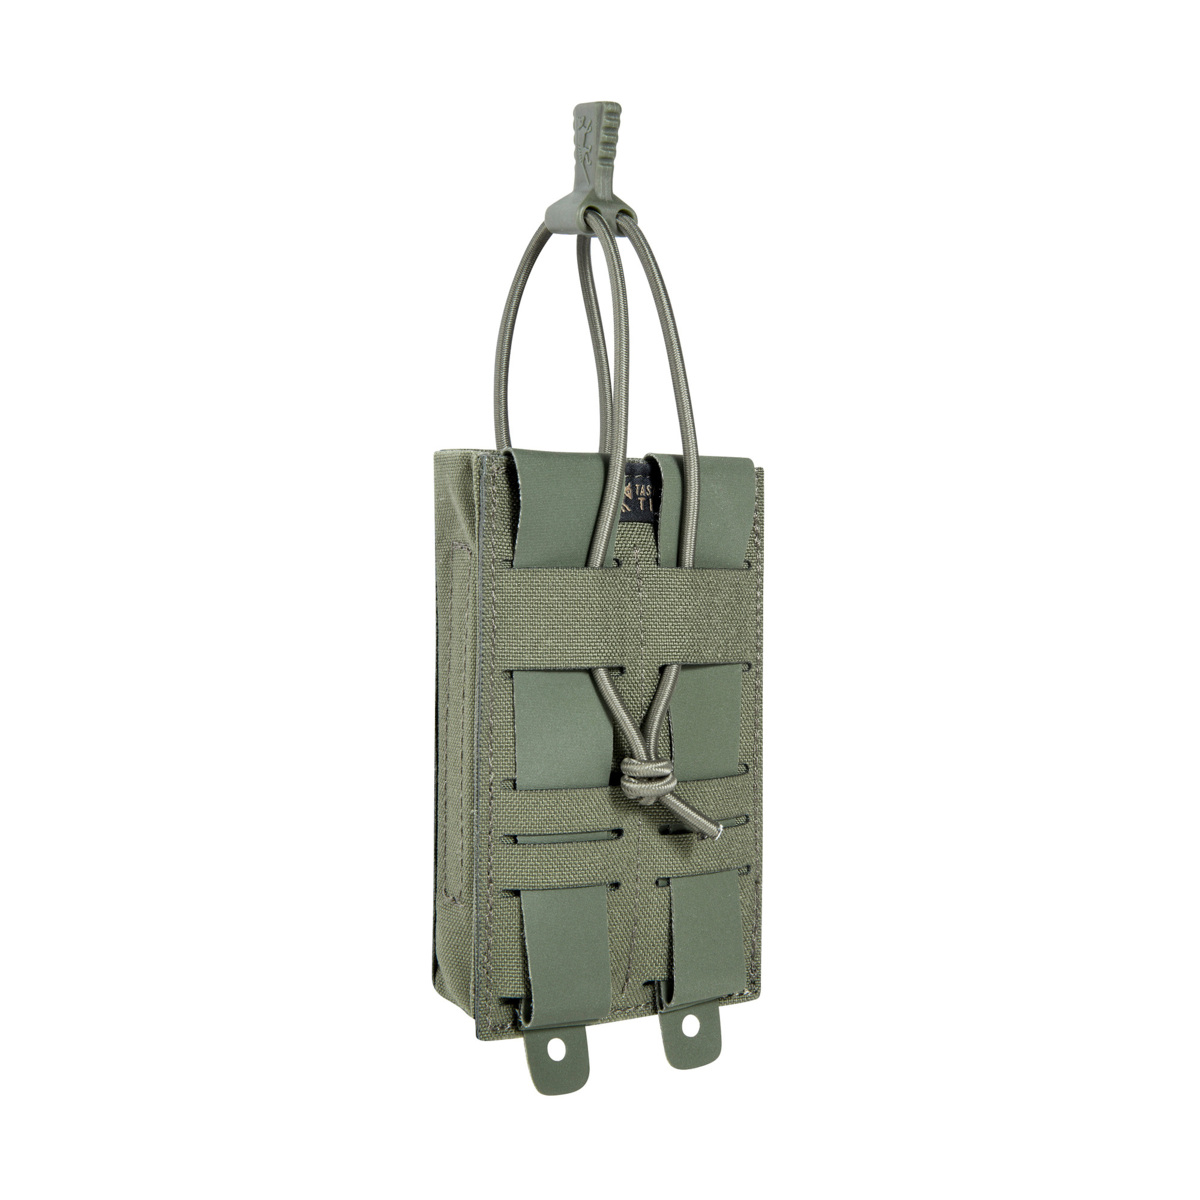 TT SGL Mag Pouch BEL M4 MKIII Olive